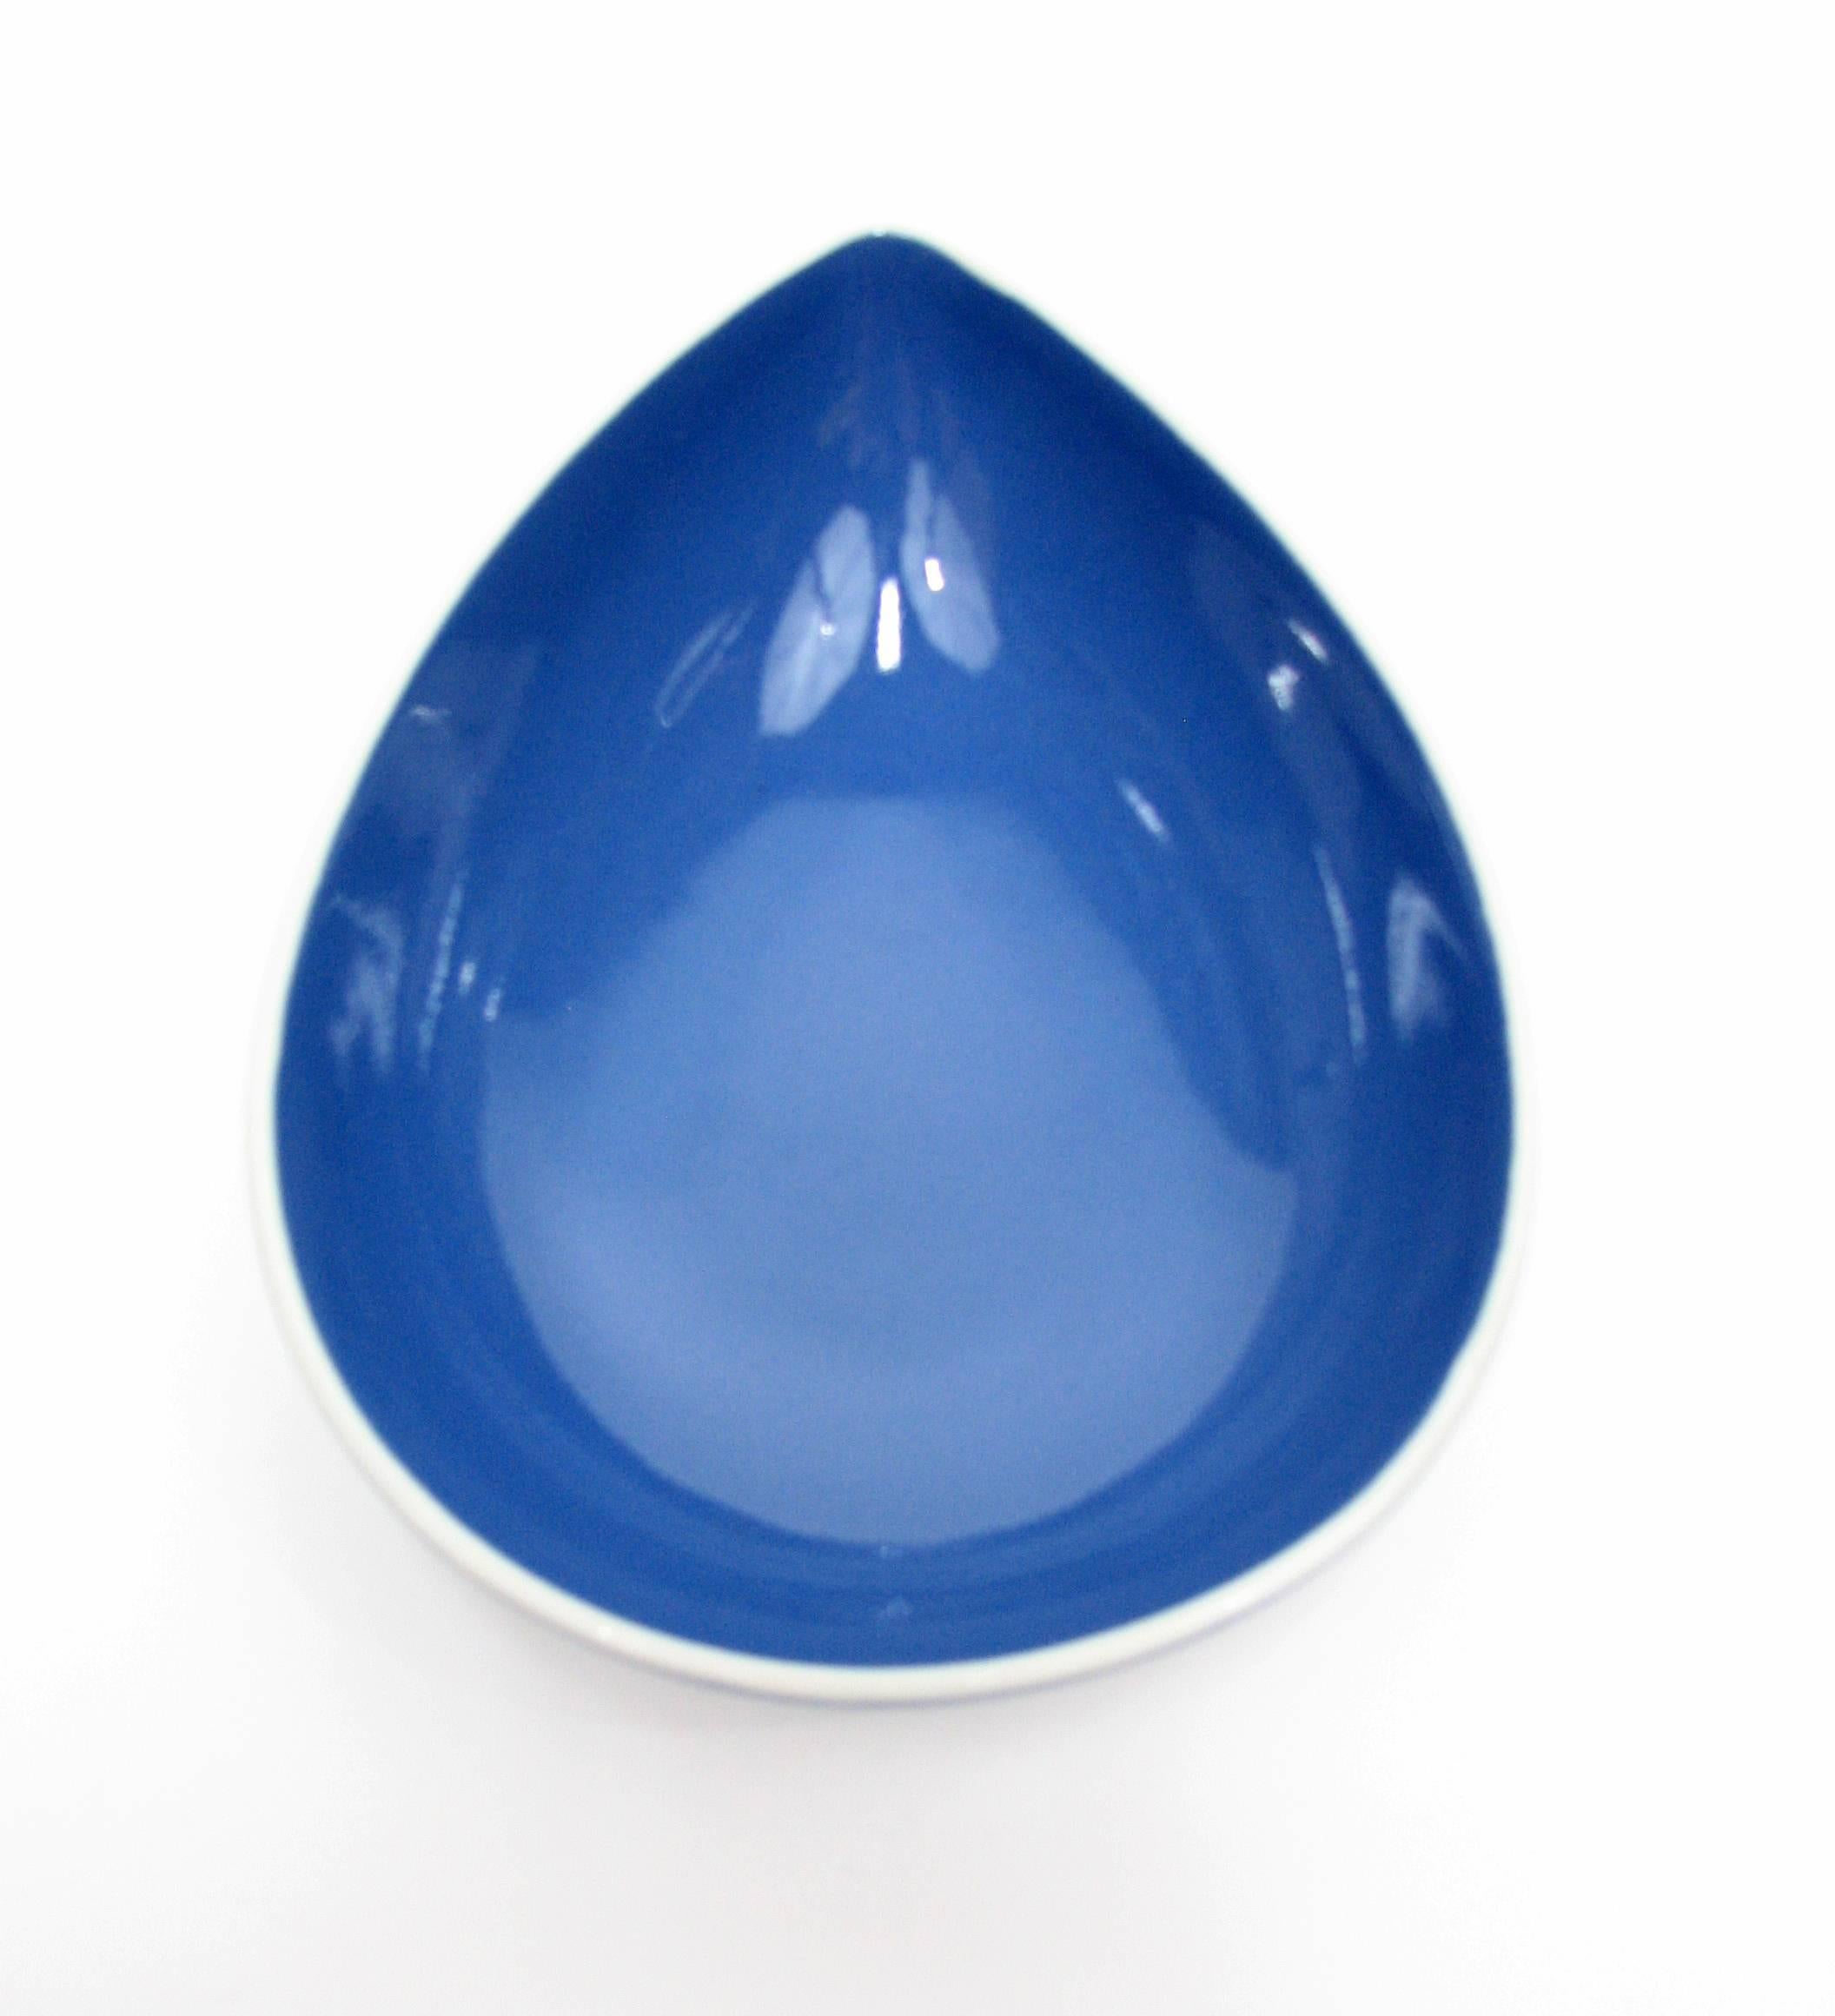 Remarkably pristine and beautiful, this blue teardrop bowl was designed by Stig Lindberg for Gustavsberg. Created in the late 1950s-early 1960s, it's in stunning shape for its age.

Stig Lindberg was a Swedish ceramic designer, glass designer,